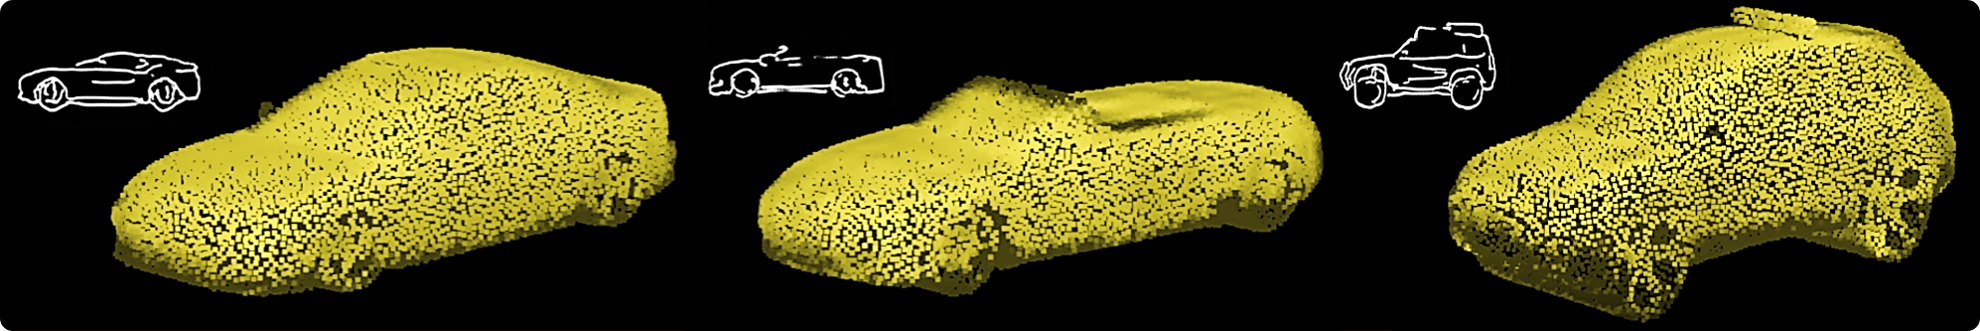 3D Car Shape Reconstruction from a Contour Sketch using GAN and Lazy Learning